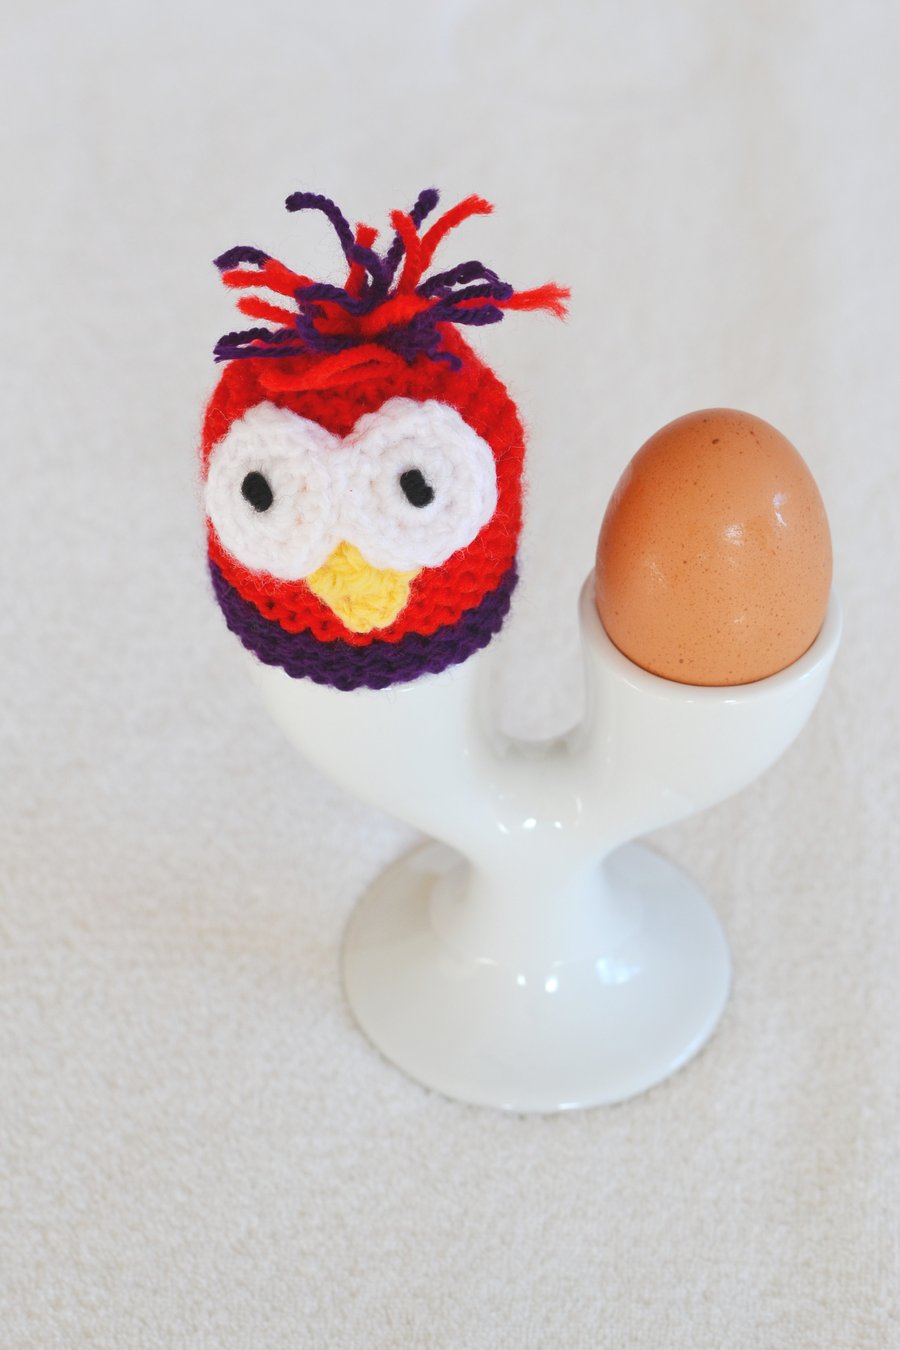 Purple and Bright Red Knitted Egg or Cream Egg Cozy